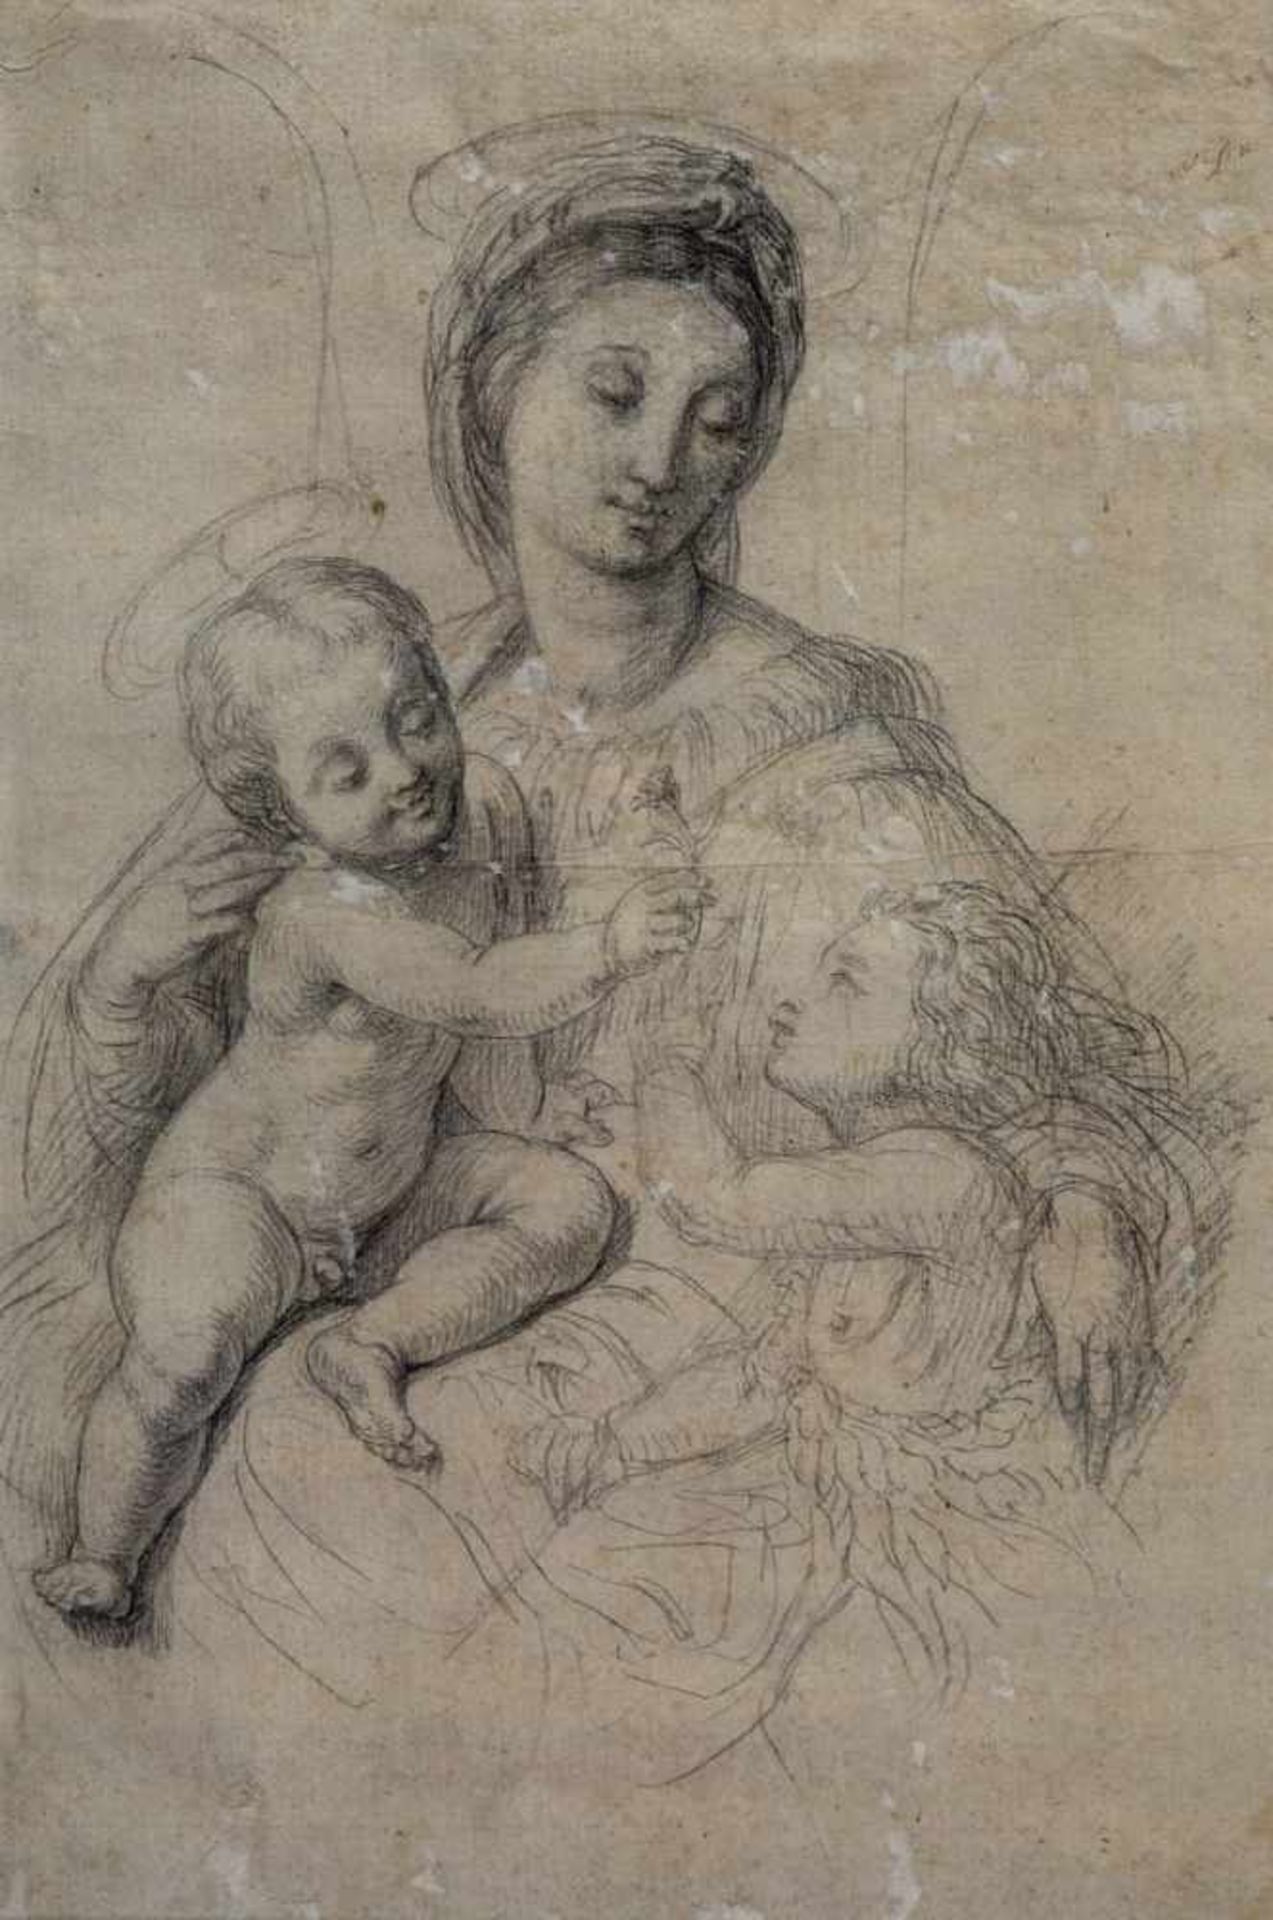 Copyist. 17th/18th century. Madonna Aldobrandini after Raphael. Pencil on paper withwatermark. On